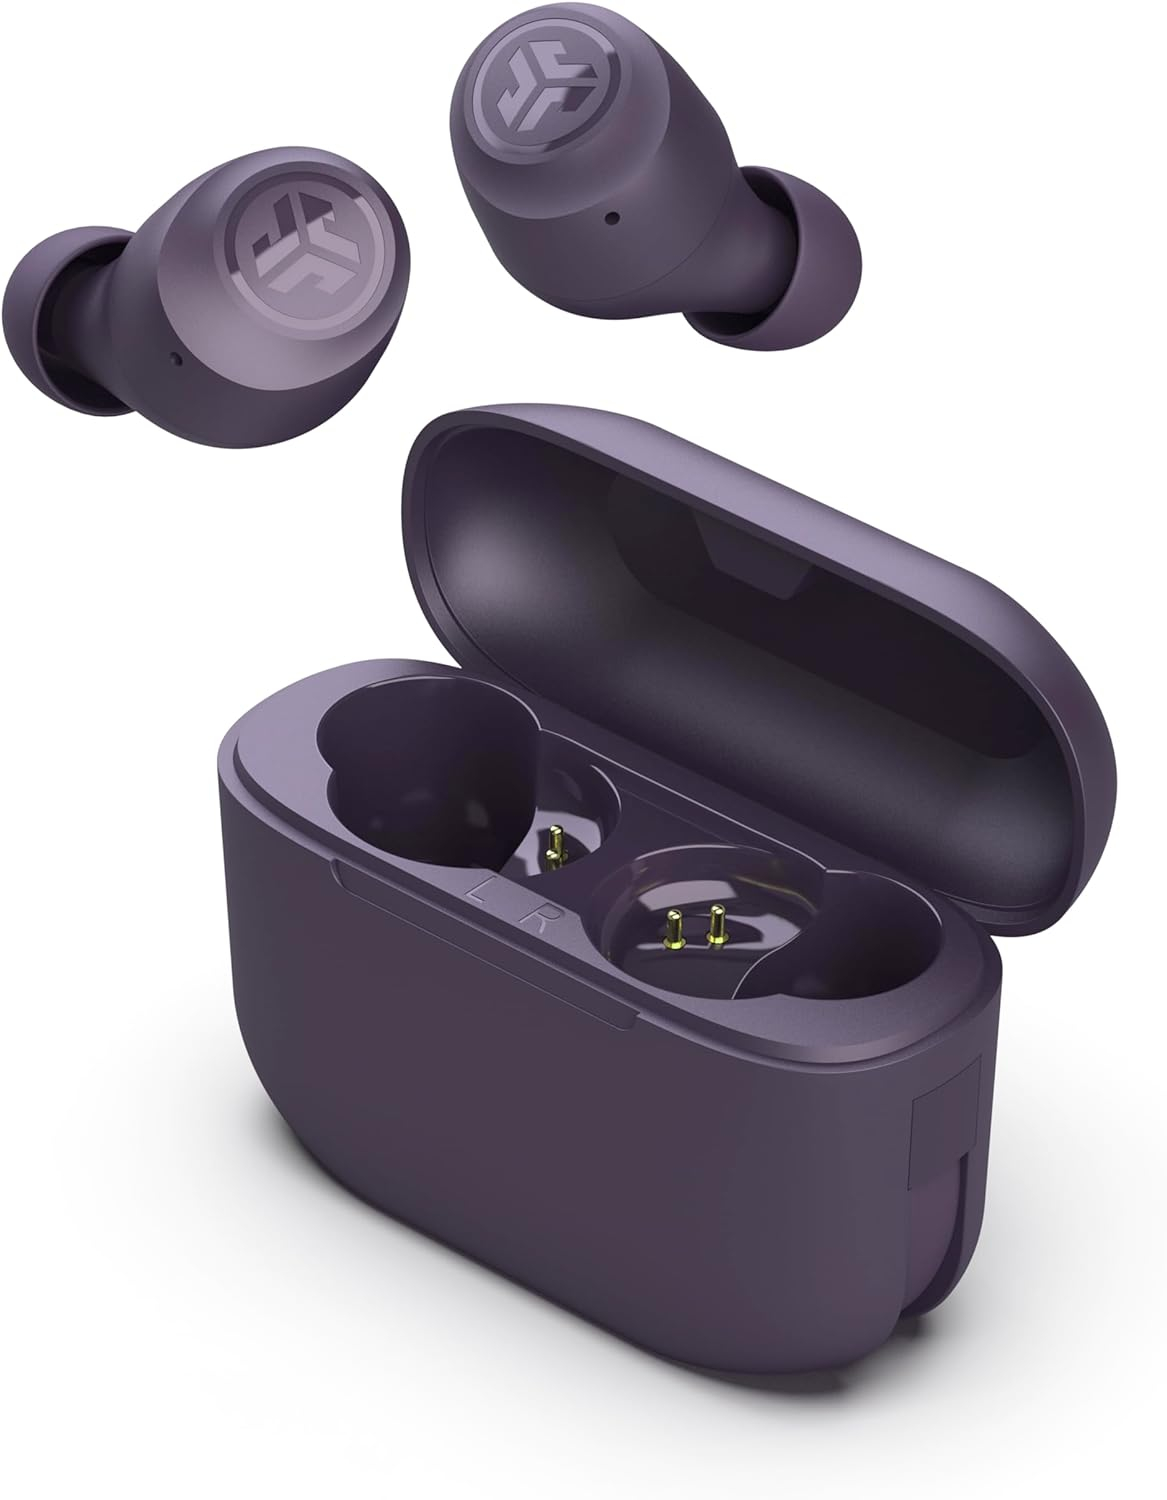 JLab Go Air Pop True Wireless Bluetooth Earbuds + Charging Case, Limited Edition Violet, Dual Connect, IPX4 Sweat Resistance, Bluetooth 5.1 Connection, 3 EQ Settings Signature, Balanced, Bass Boost